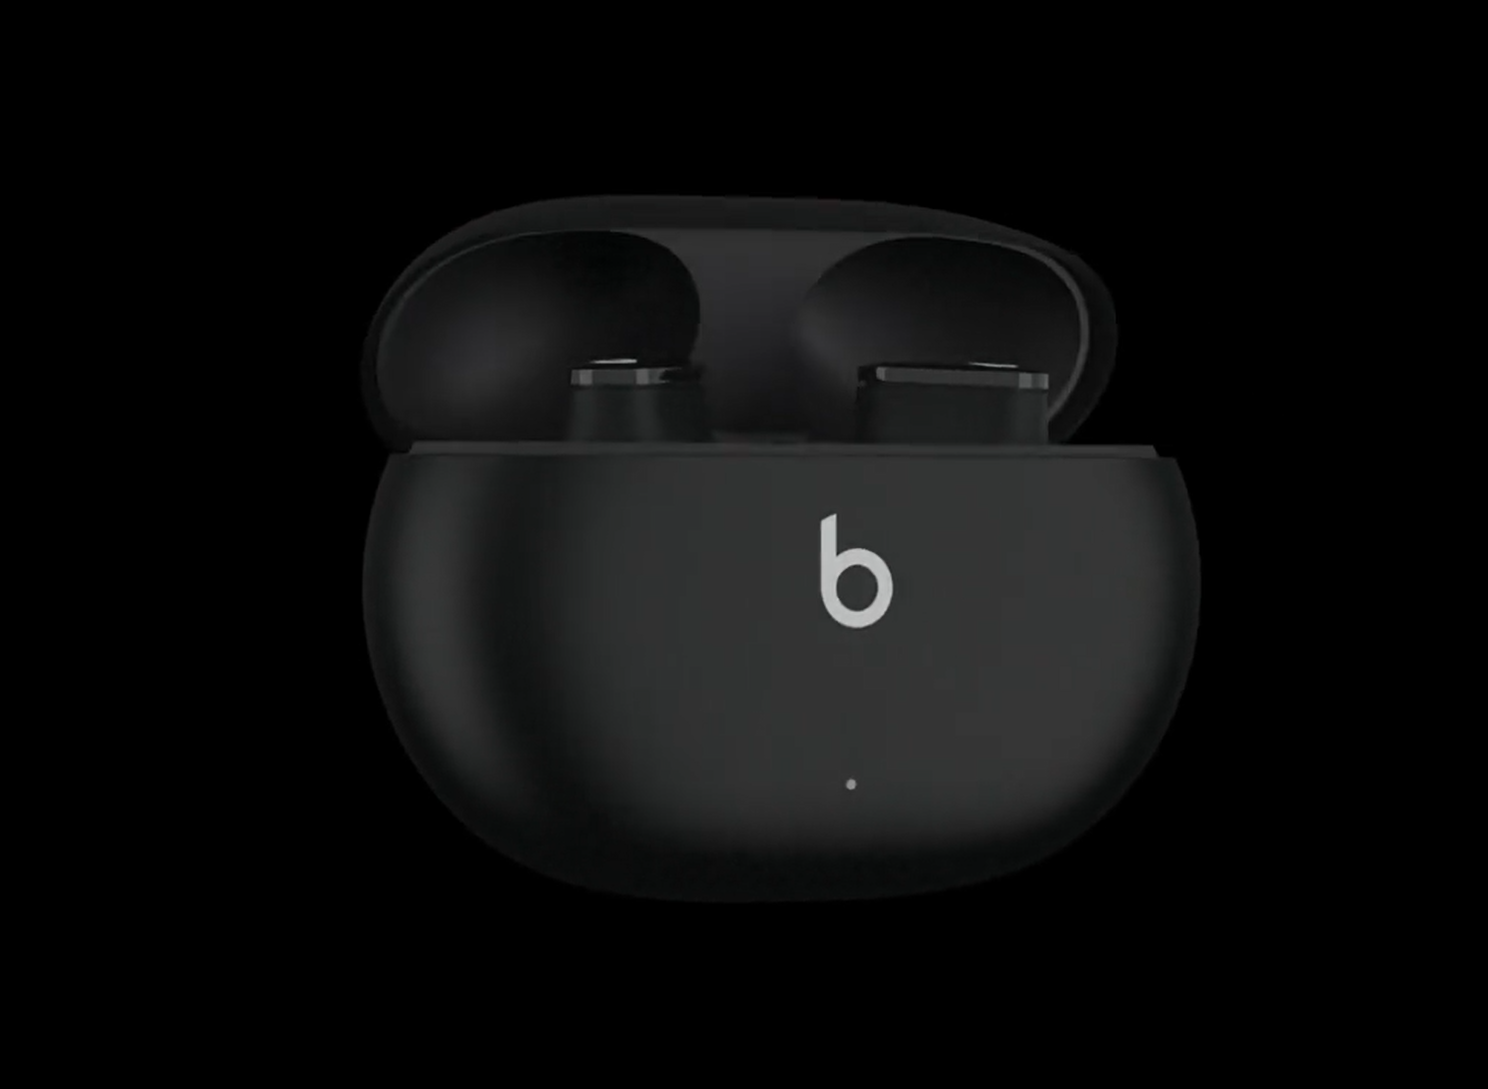 Leaked Apple Beats Studio Buds do not have a stem